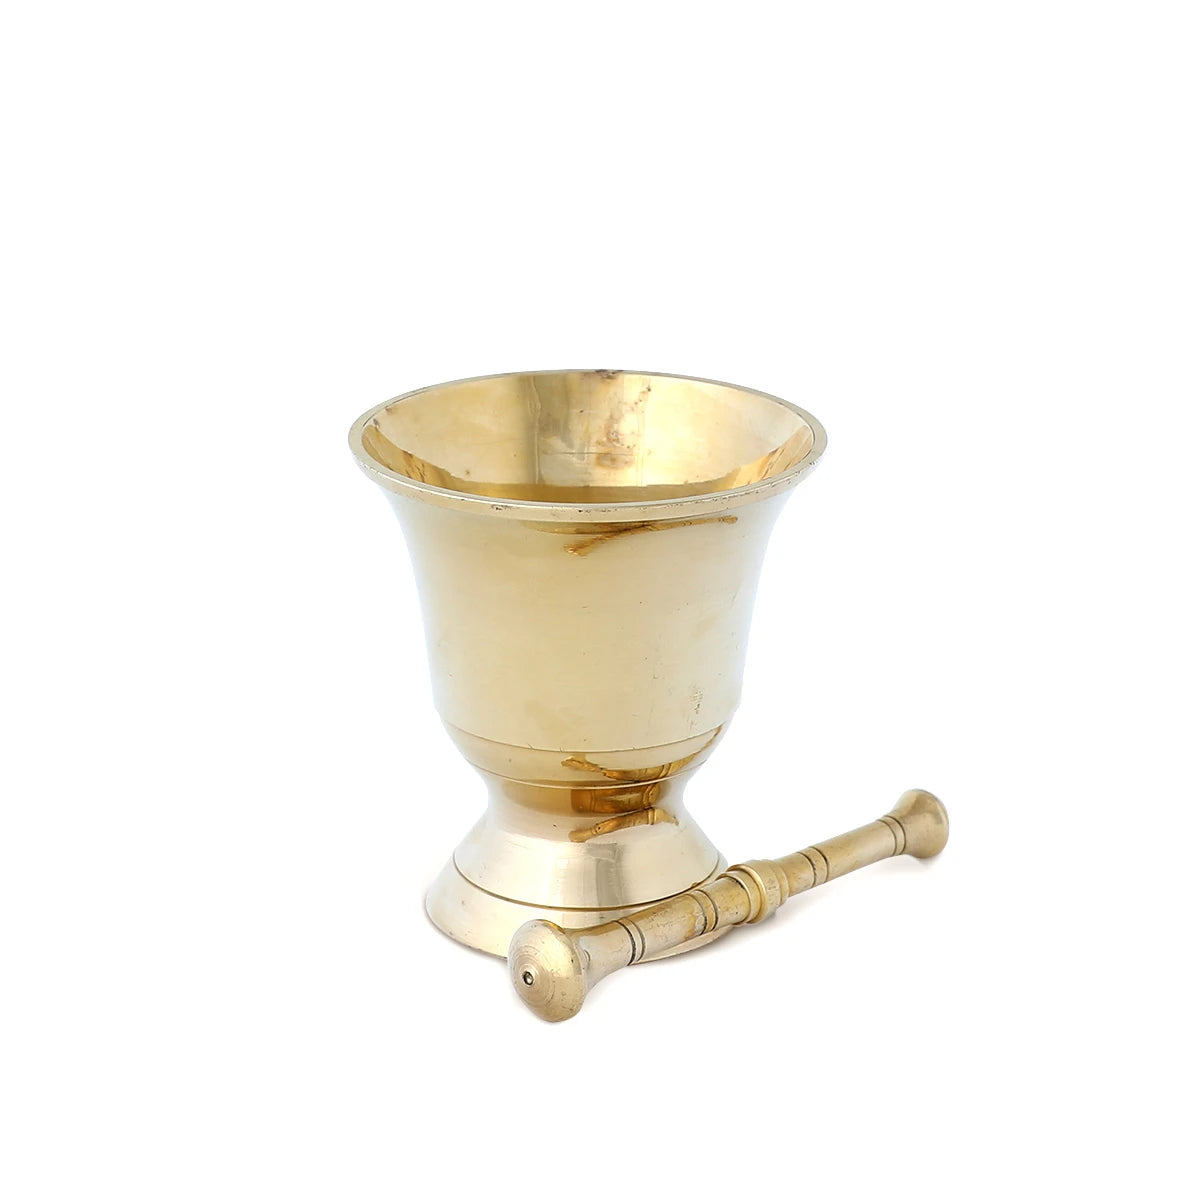 Front View of Solid Brass Mortar - Glossy Gold Color